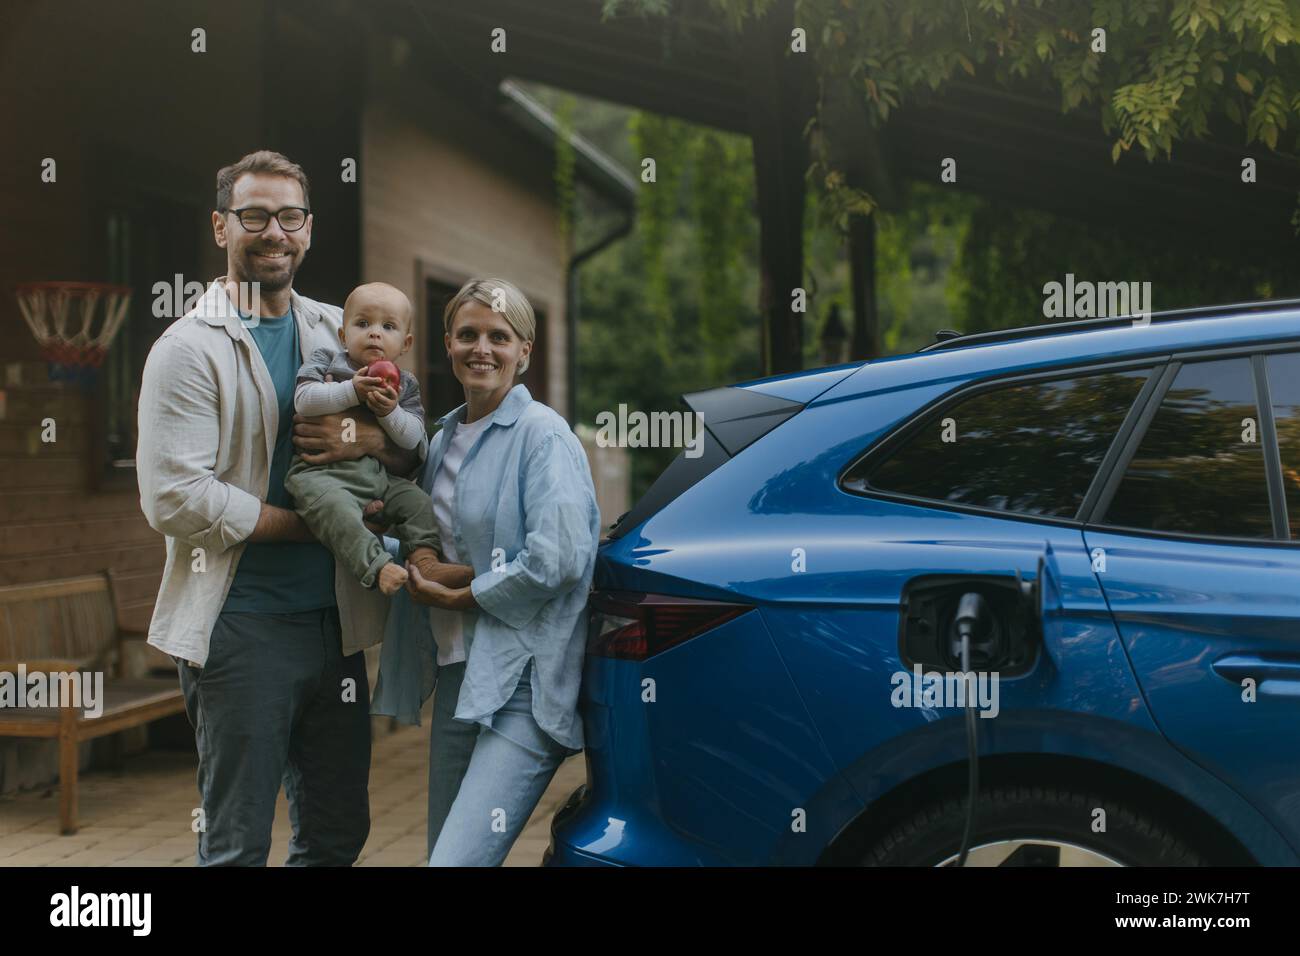 Young family with little baby standing by their electric car. Electric vehicle with charger in charging port. Stock Photo